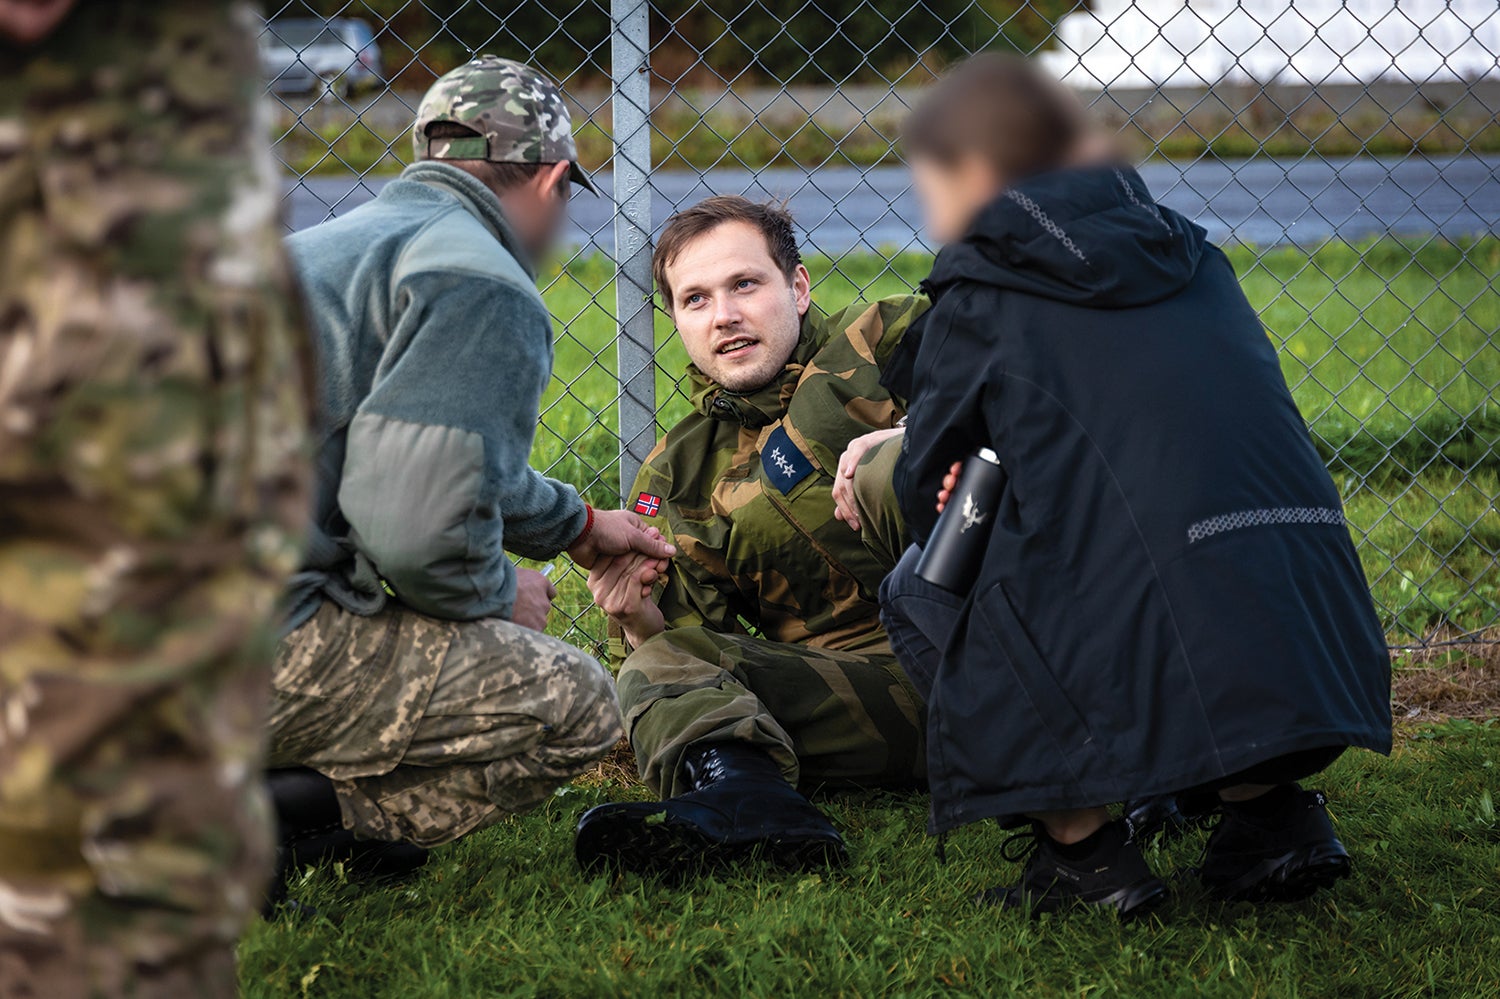 Participants work through an acute stress scenario. The faces of Ukrainian participants are blurred to protect their identities. (Credit: Norwegian Home Guard/Kristian Kapelrud)